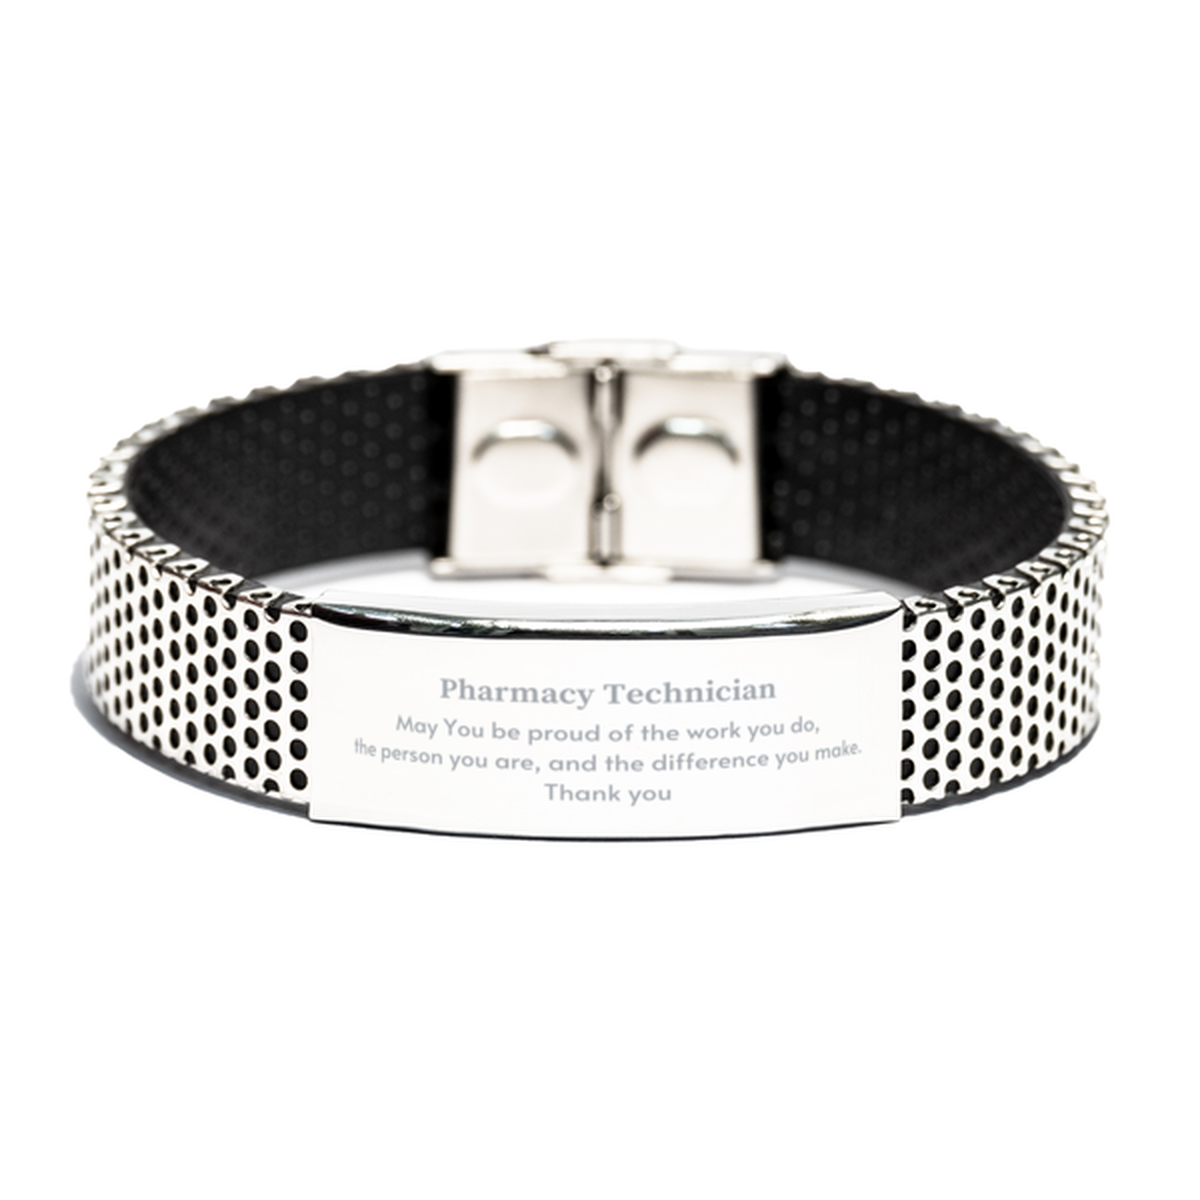 Heartwarming Stainless Steel Bracelet Retirement Coworkers Gifts for Pharmacy Technician, Pharmacy Technician May You be proud of the work you do, the person you are Gifts for Boss Men Women Friends